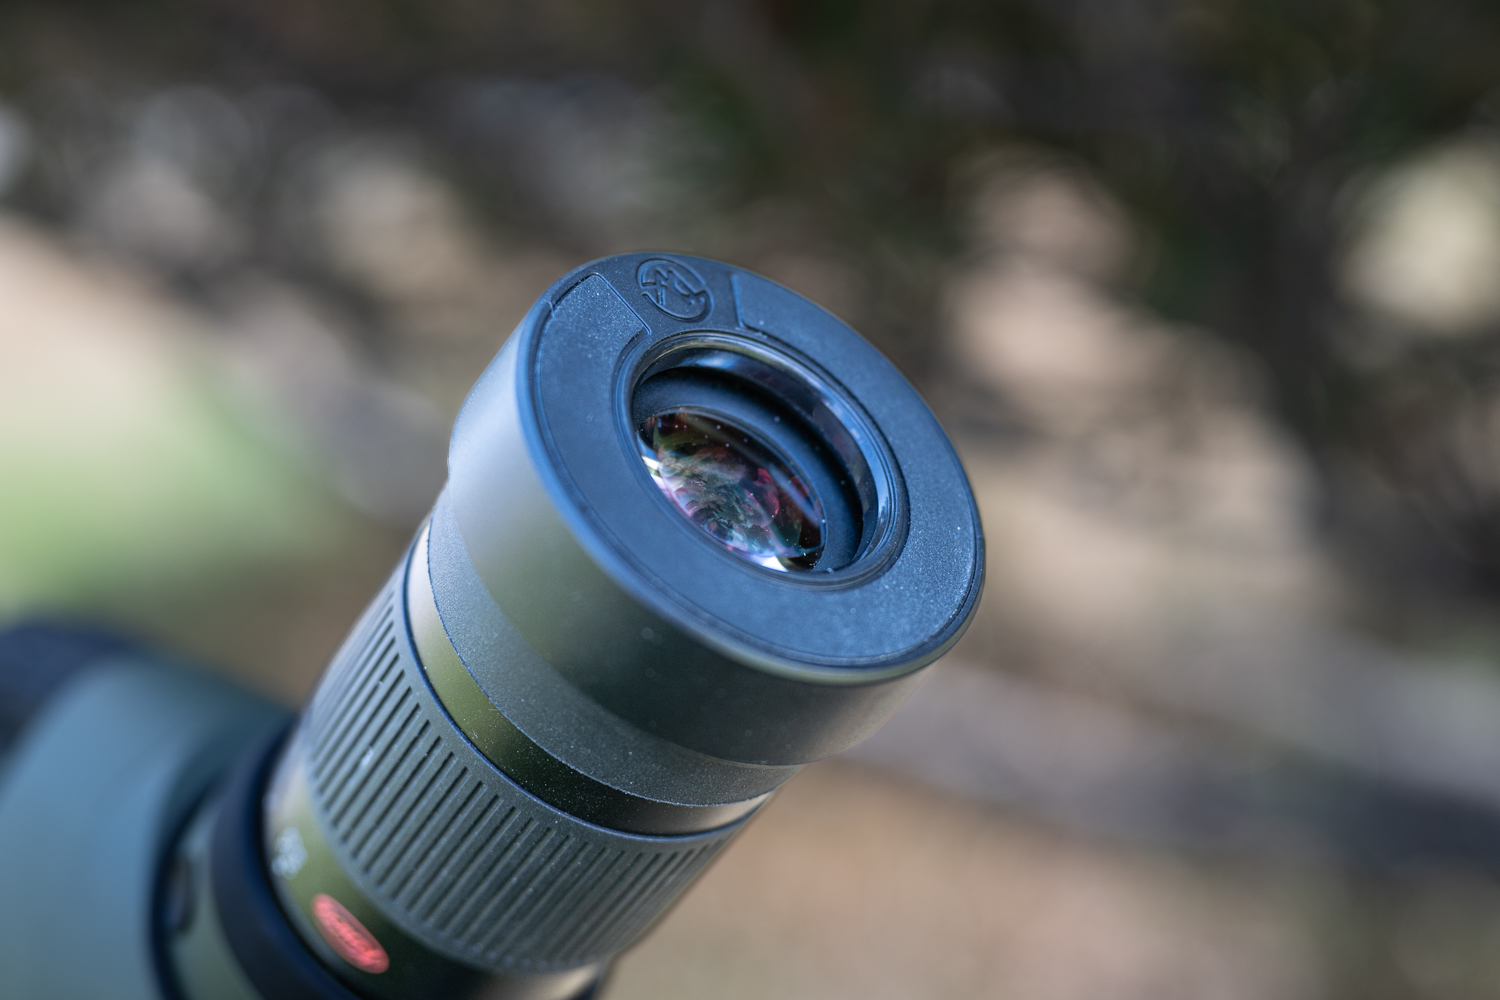 Ollin’s sleek adapter can be left on the scope for viewing.